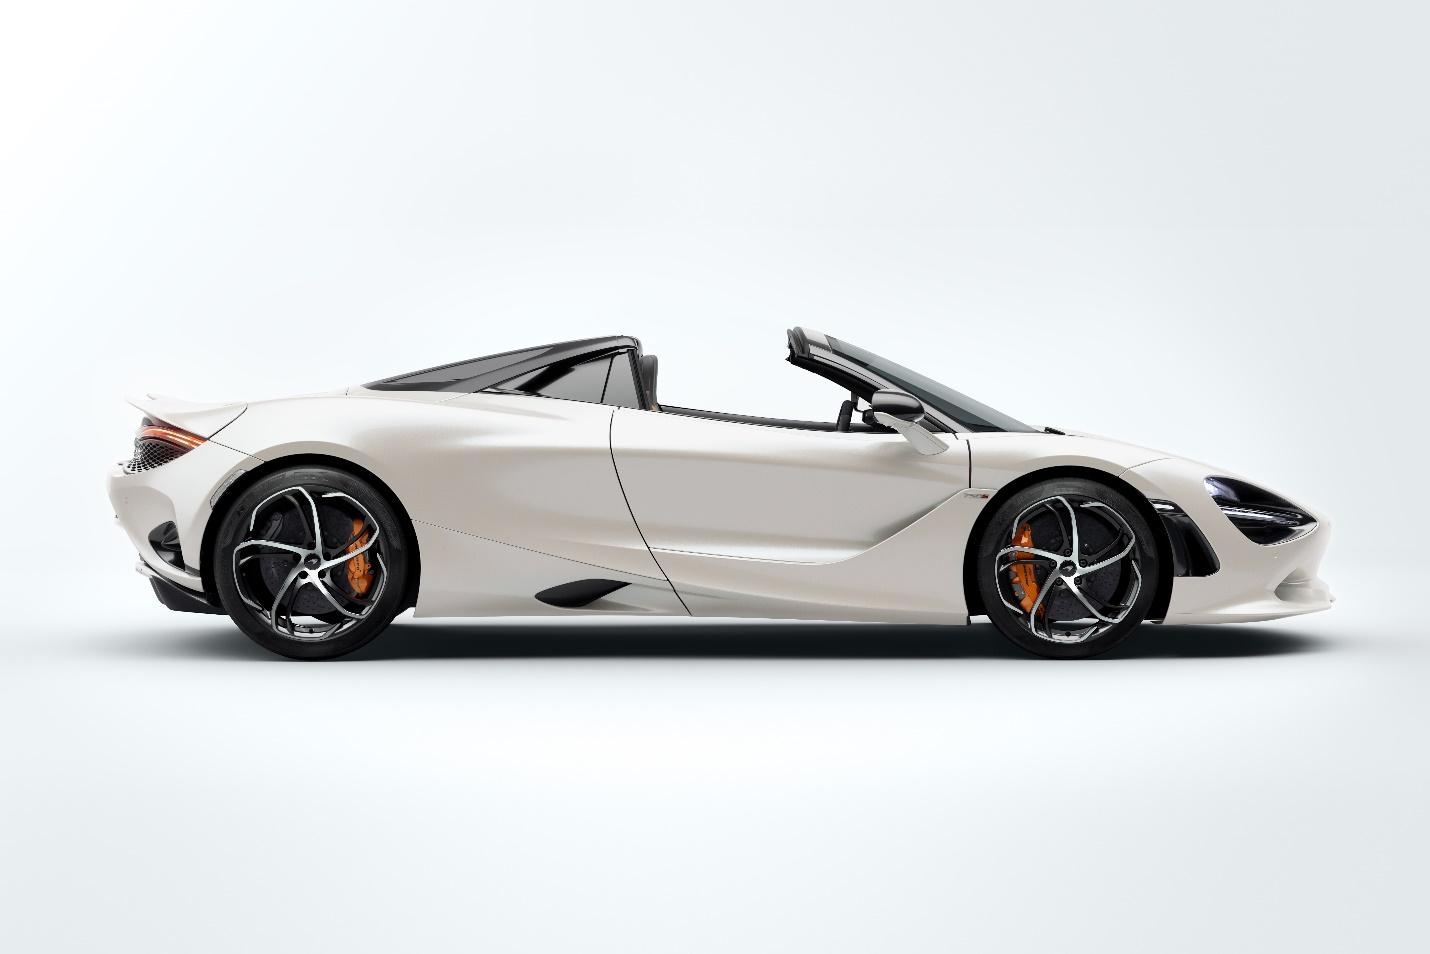 A white sports car with black wheels

Description automatically generated